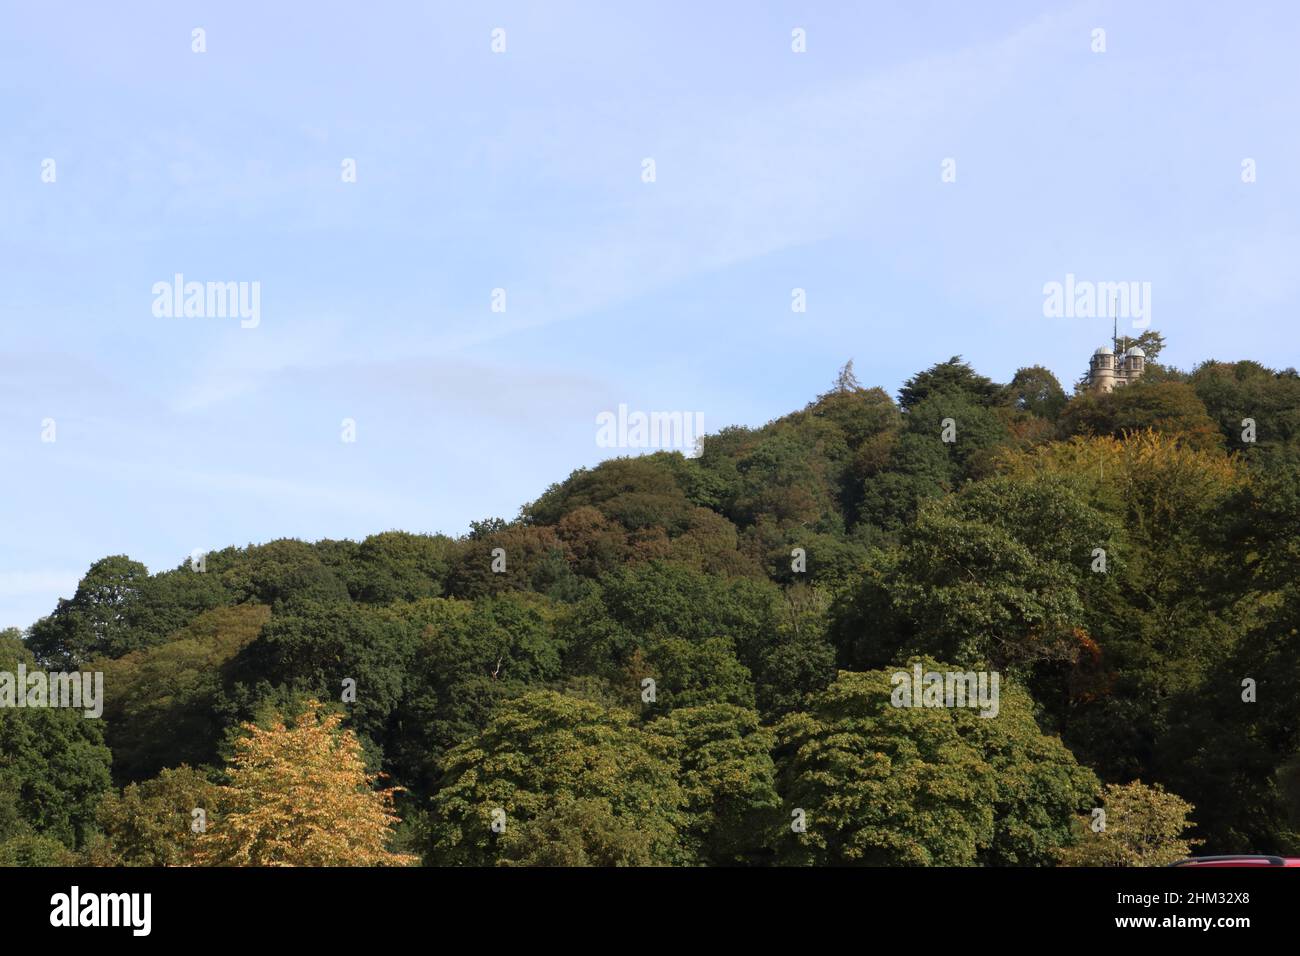 Hunting Tower, Barbrook Gardens, Bakewell, Derbyshire, England, UK Stock Photo